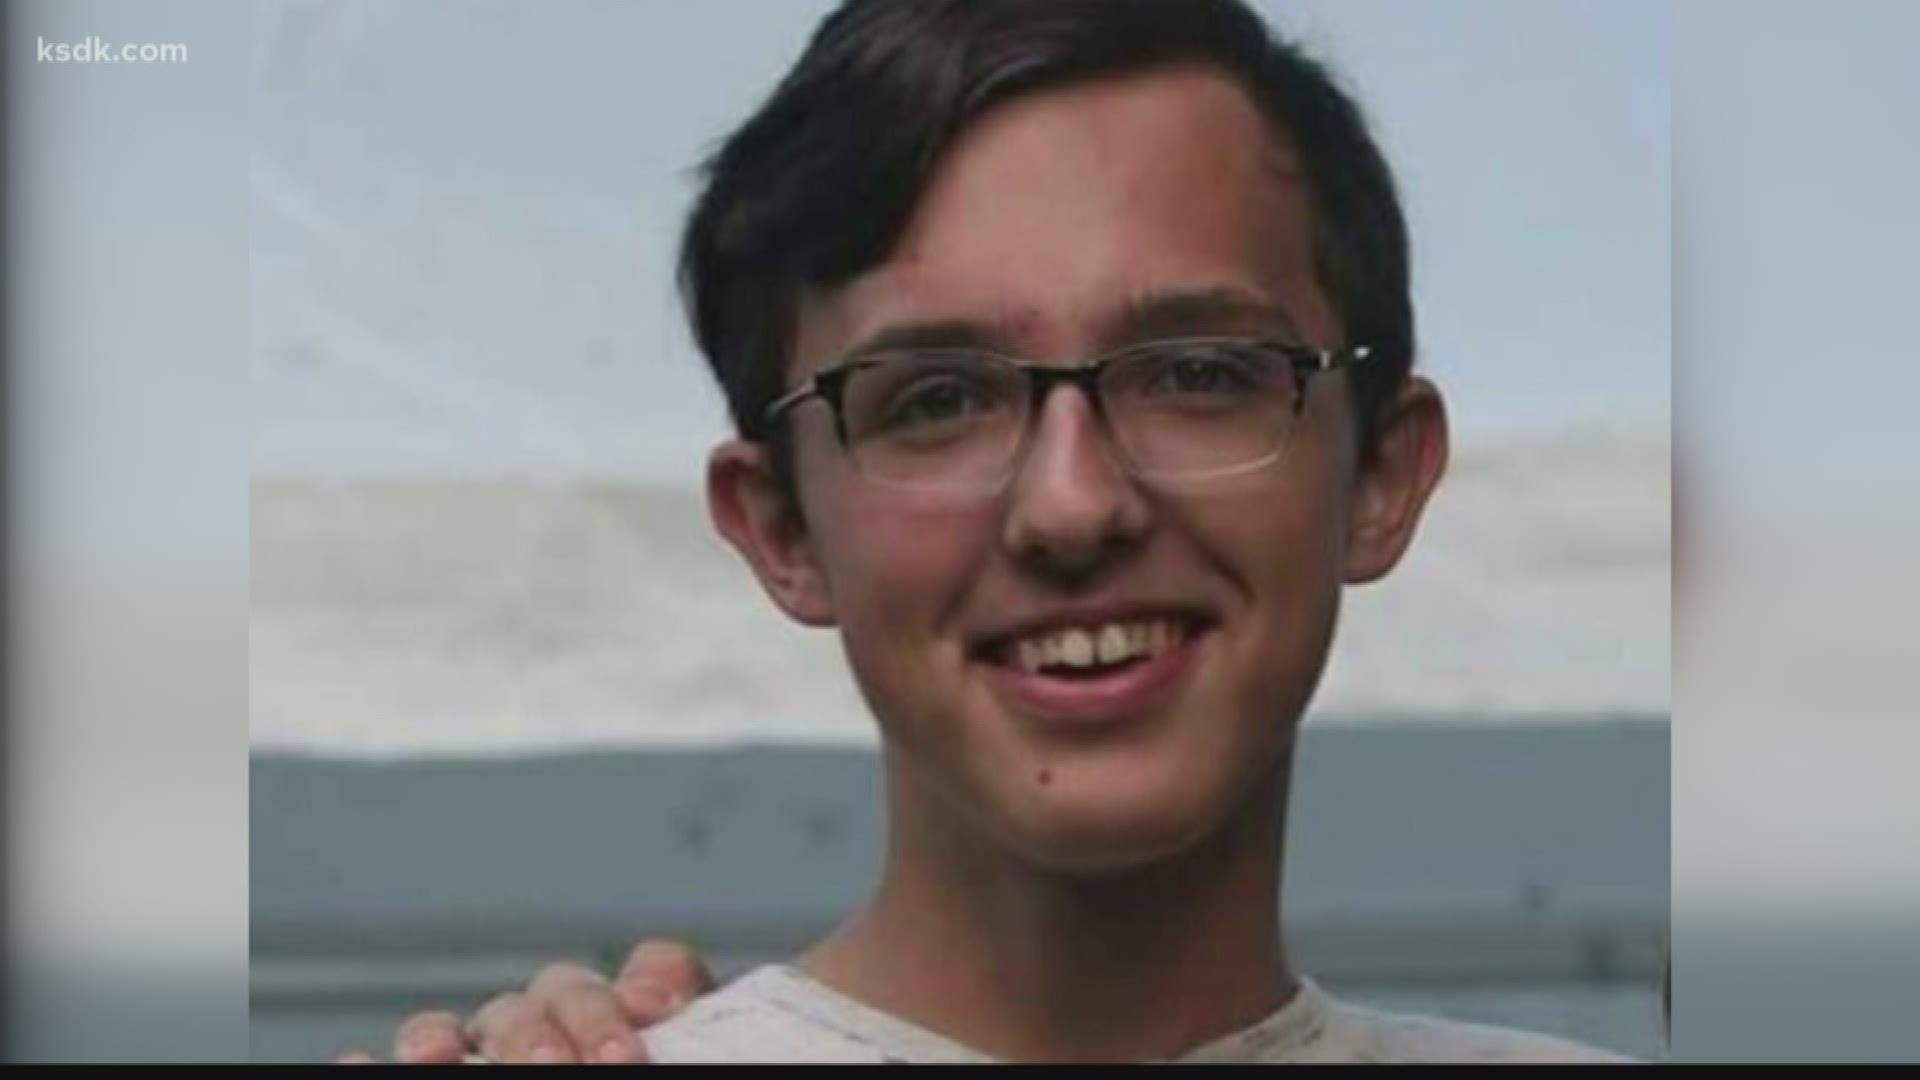 16-year-old Trenton Crane was supposed to be a Junior next year at Herculaneum High School.